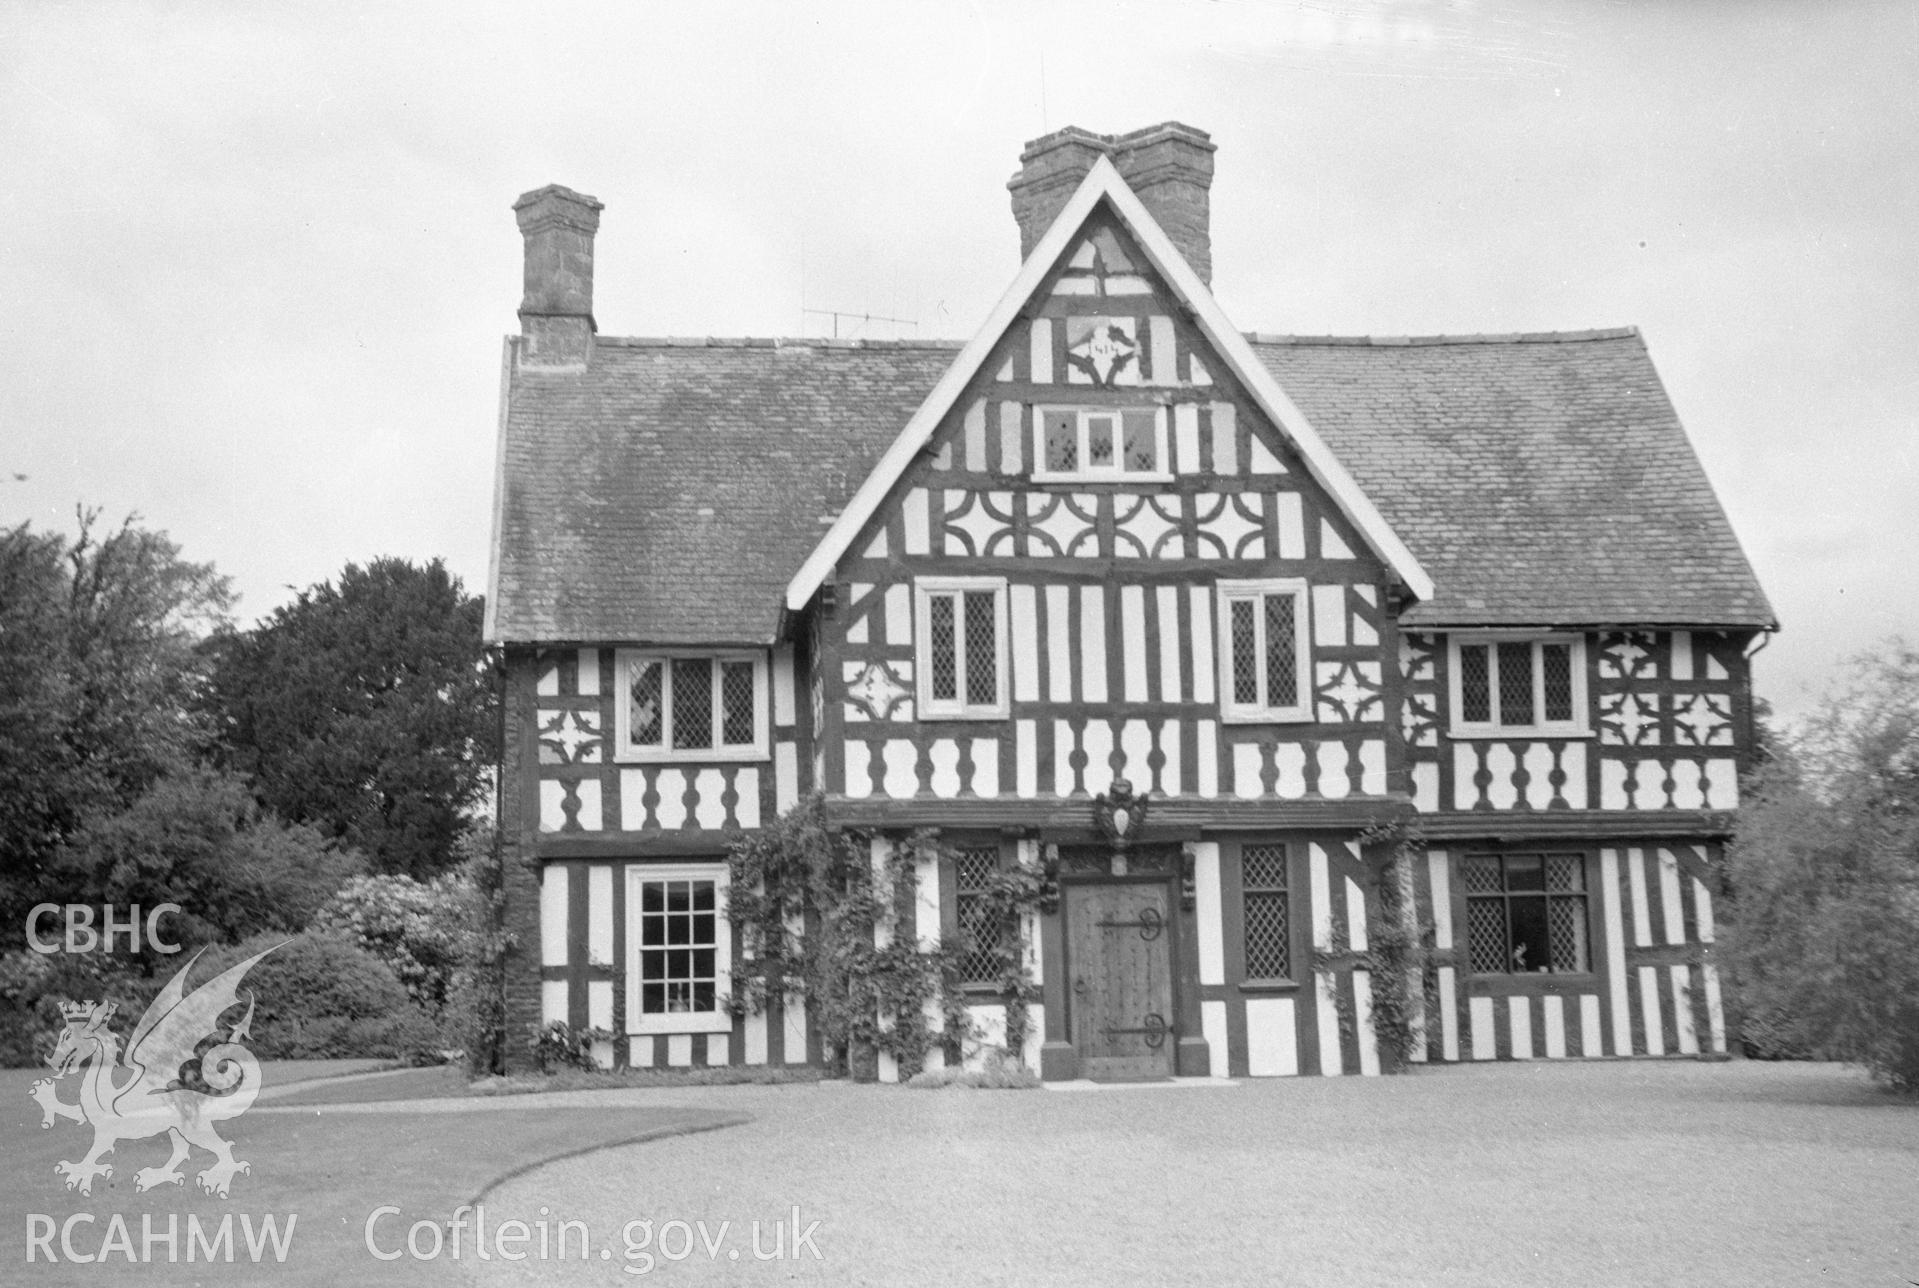 Digital copy of a nitrate negative showing view of Maesmawr Hall.